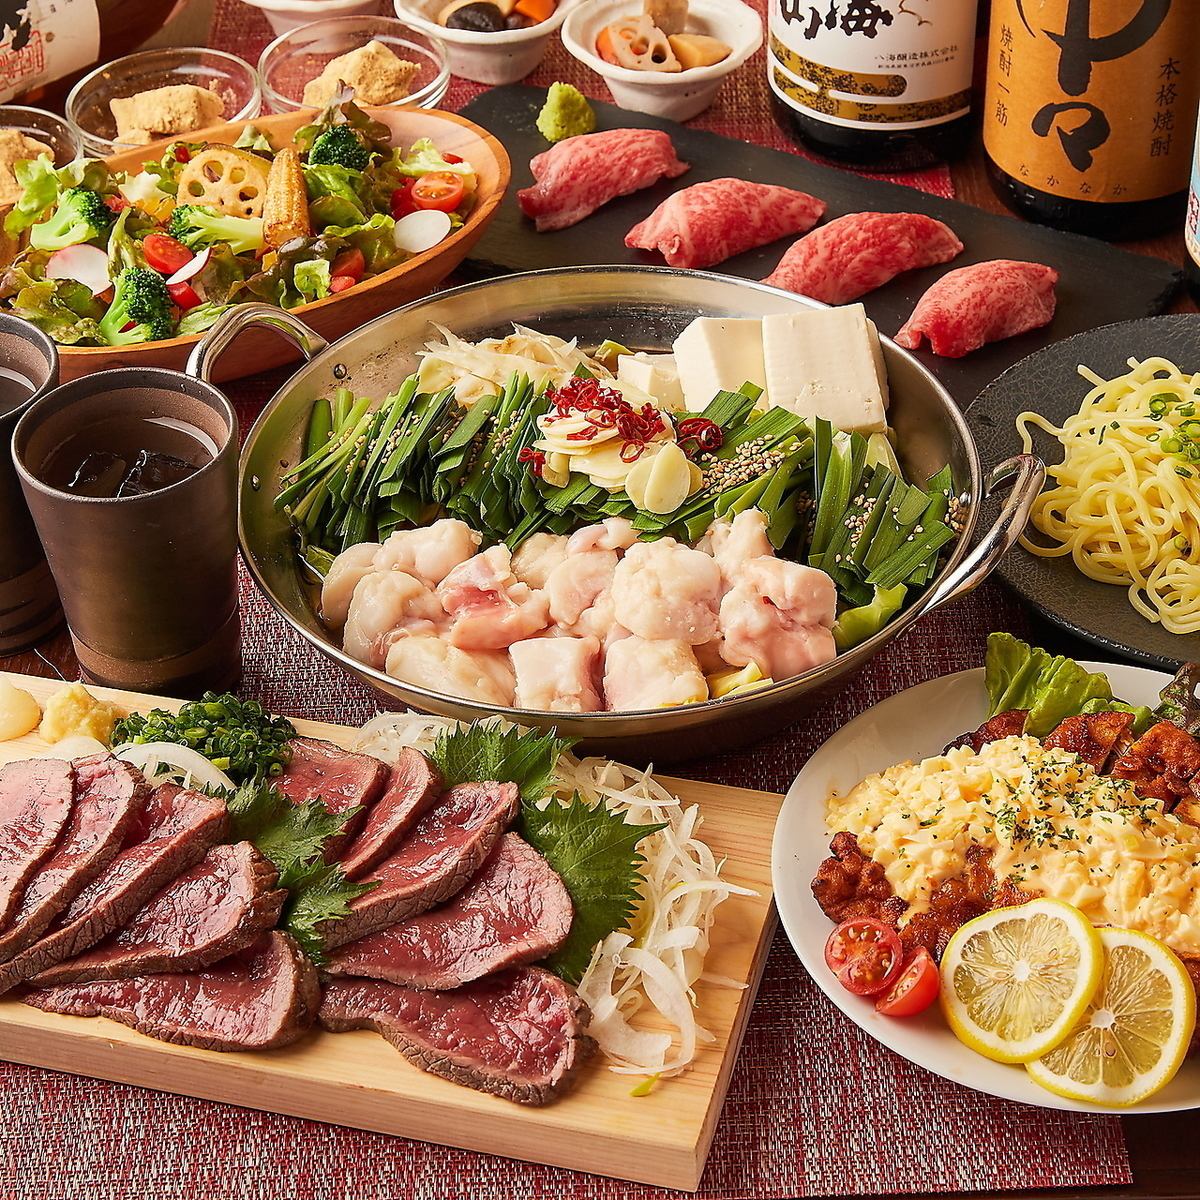 The most popular all-you-can-eat restaurant in the Yokohama area! Great value plans starting from 3,000 yen ◎